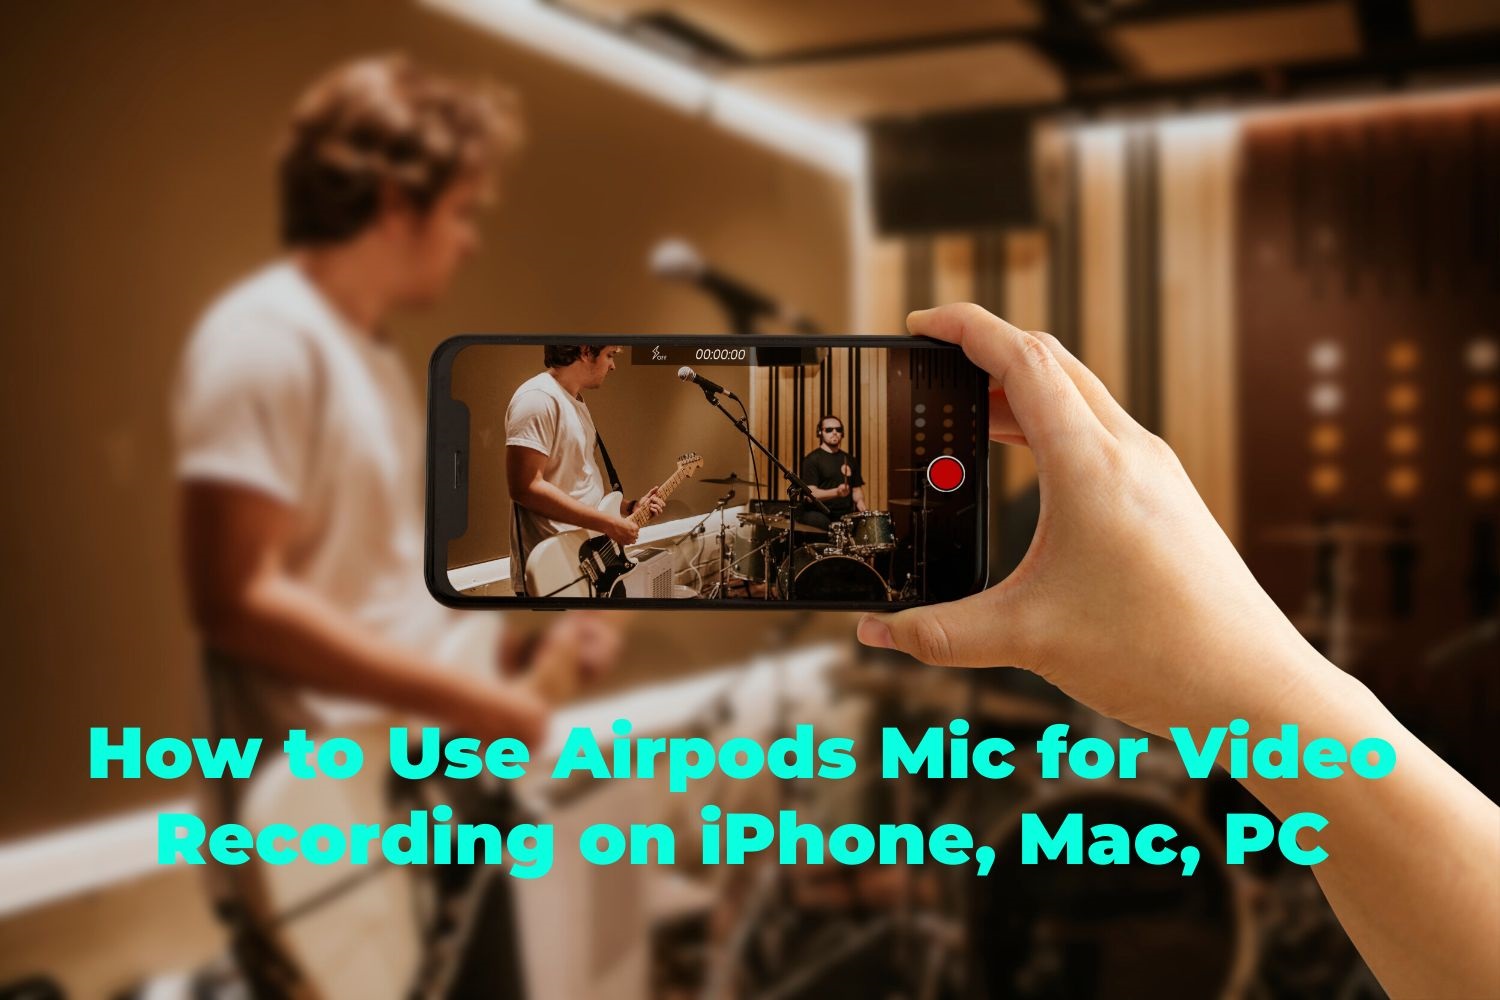 Guys recording video on mobile with AirPods mic for audio capture